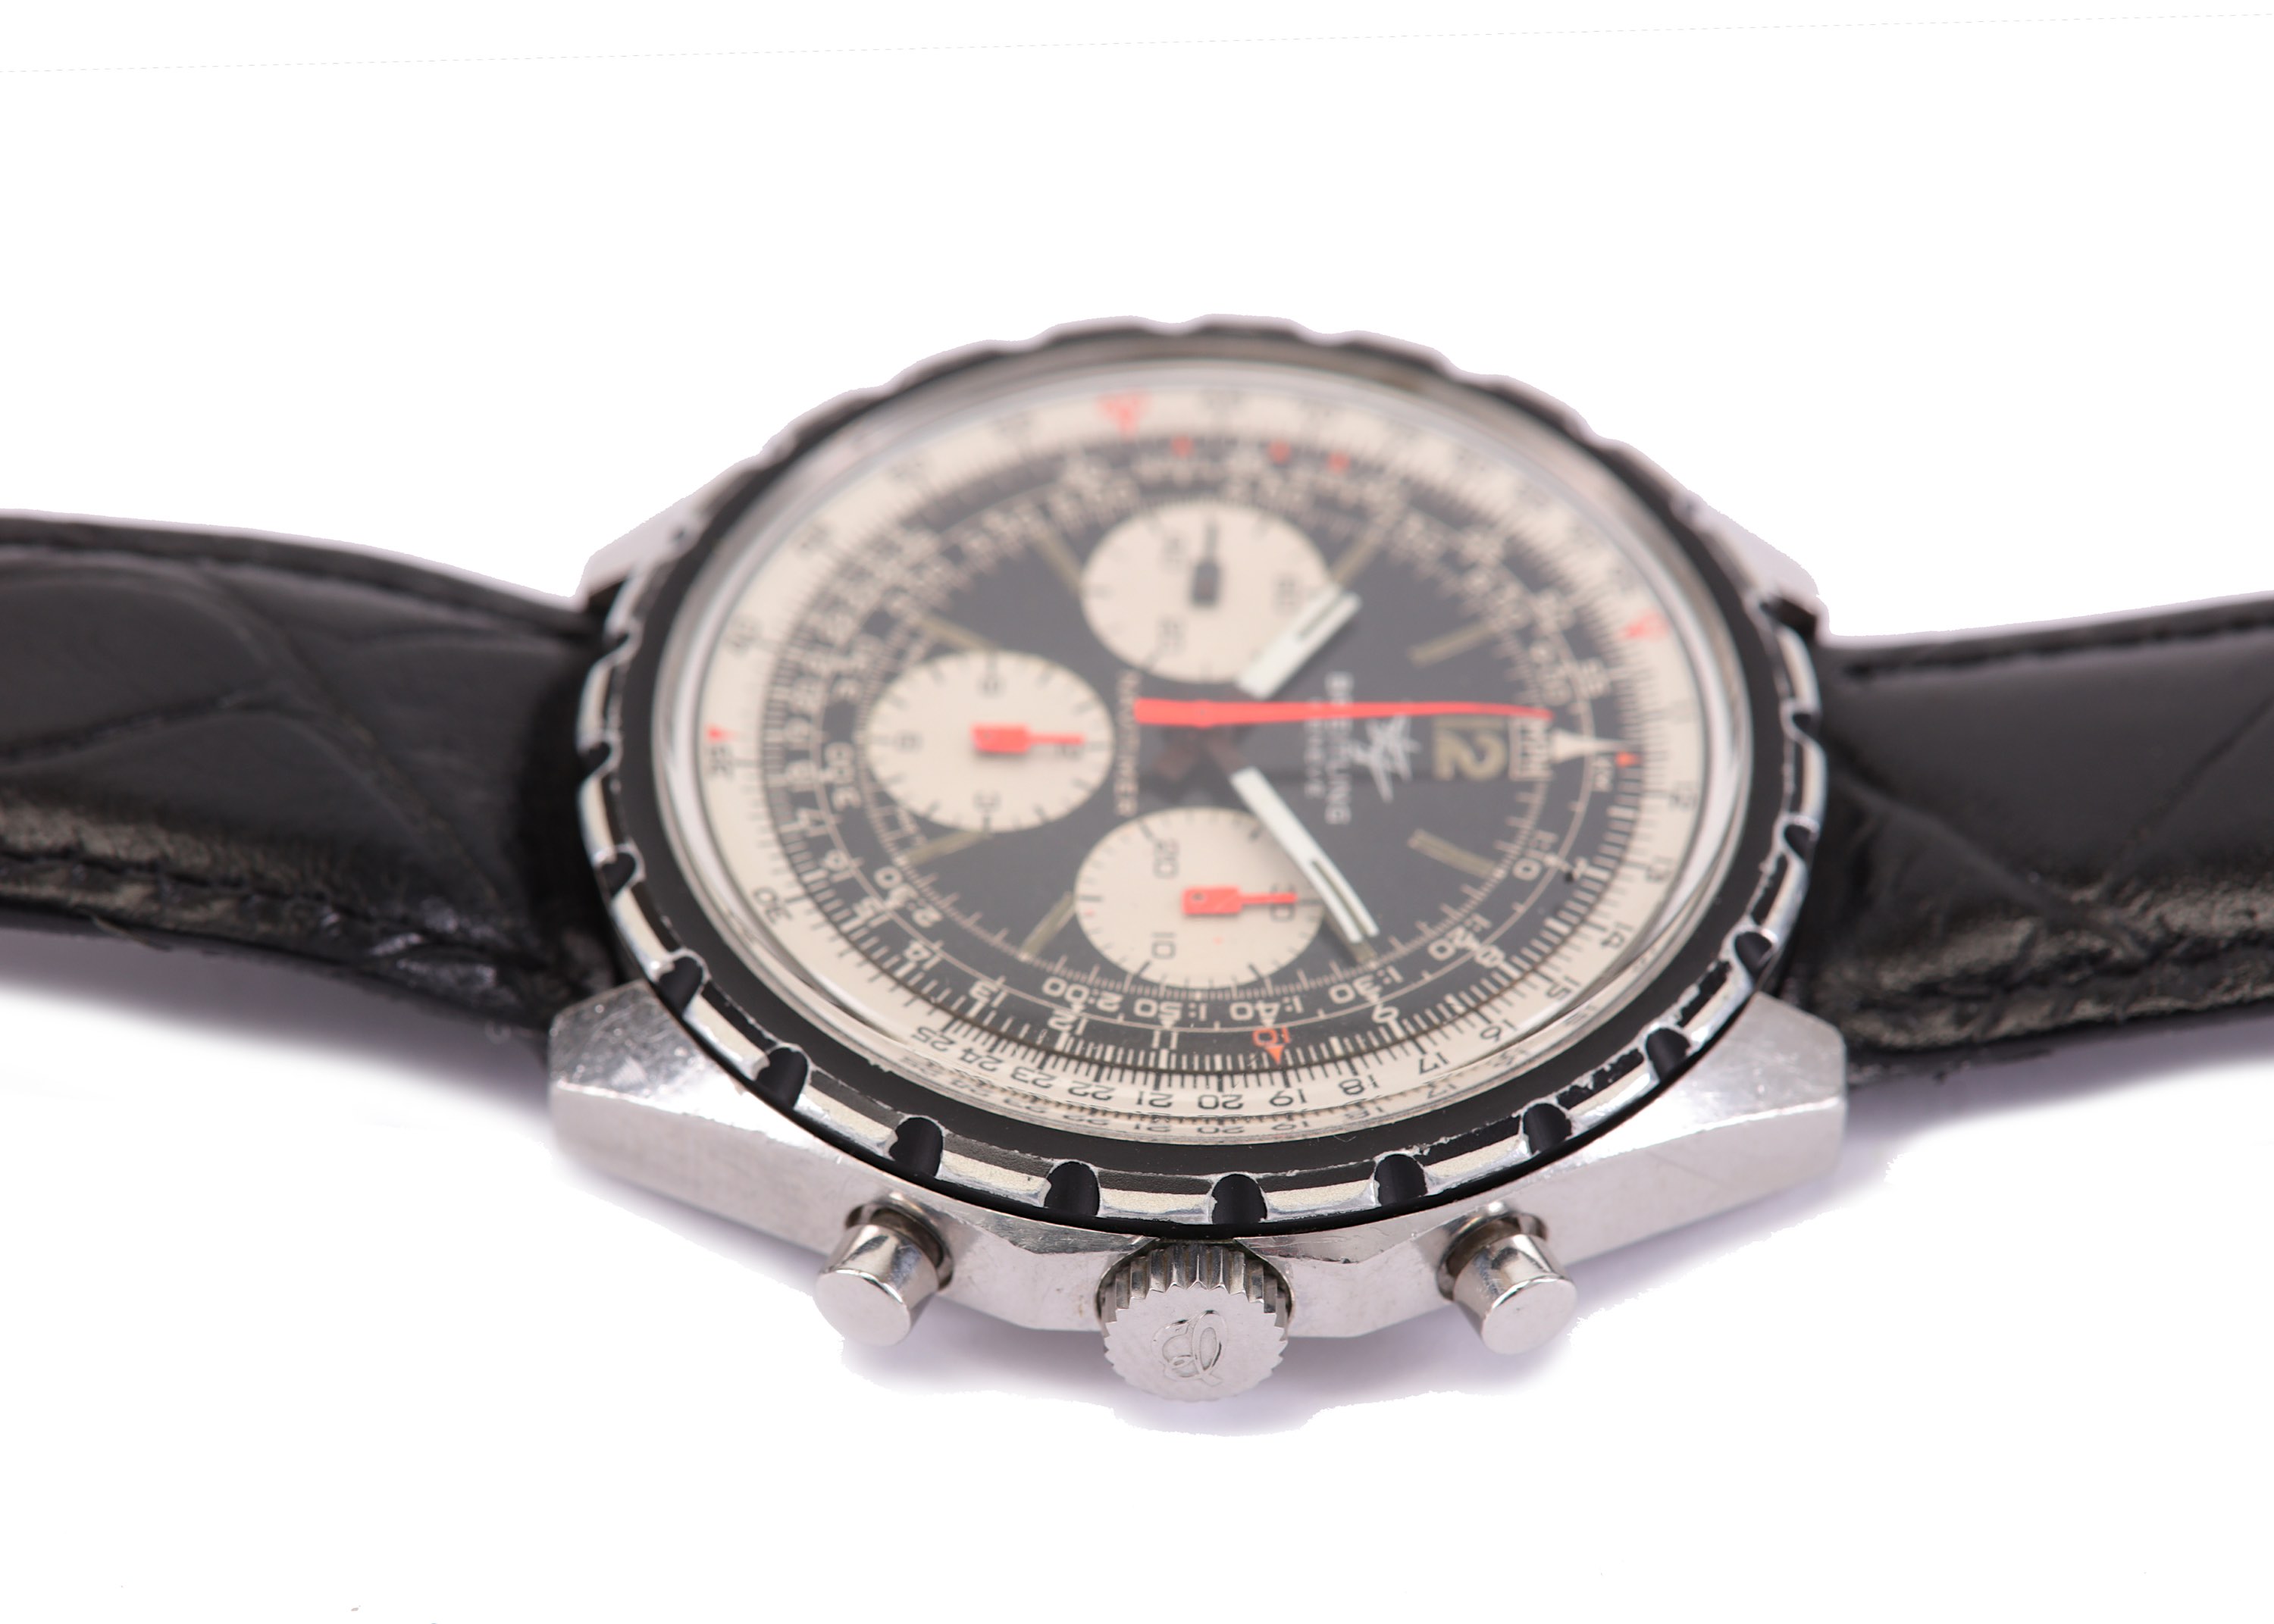 BREITLING. A OVERSIZED STAINLESS STEEL MANUAL WIND CHRONOGRAPH WRISTWATCH. Date: Circa 1967. - Image 2 of 6